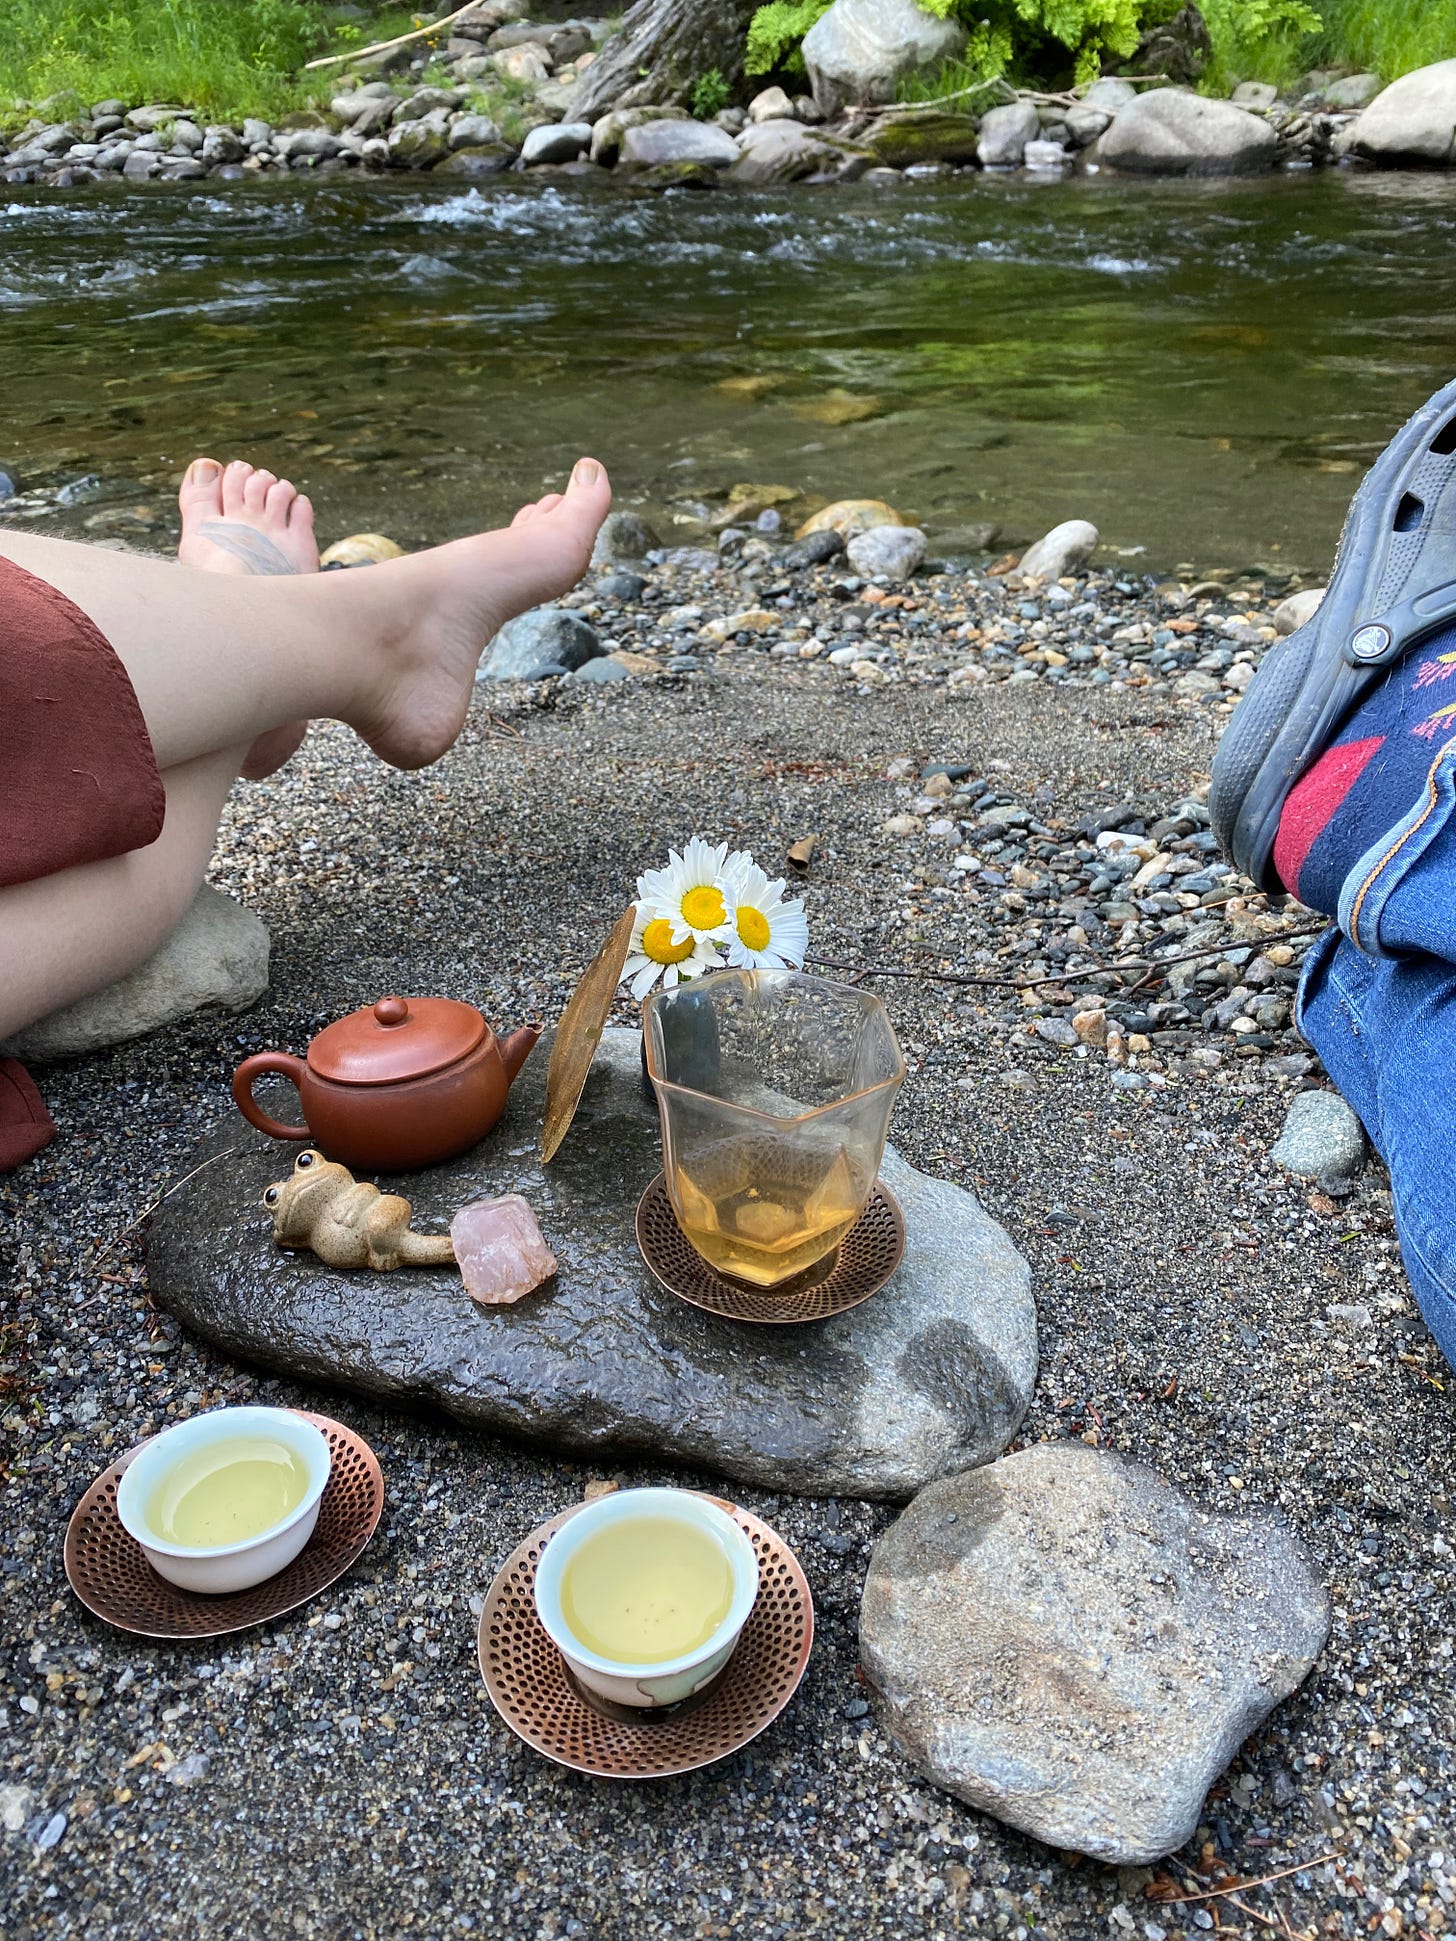 A tea setup on a flat rock by a river: two small cups on bronze saucers, a small teapot, a frog tea animal, a tiny vase of daises. The crossed, outstretched legs of two people are visible on either side of the tea setup.